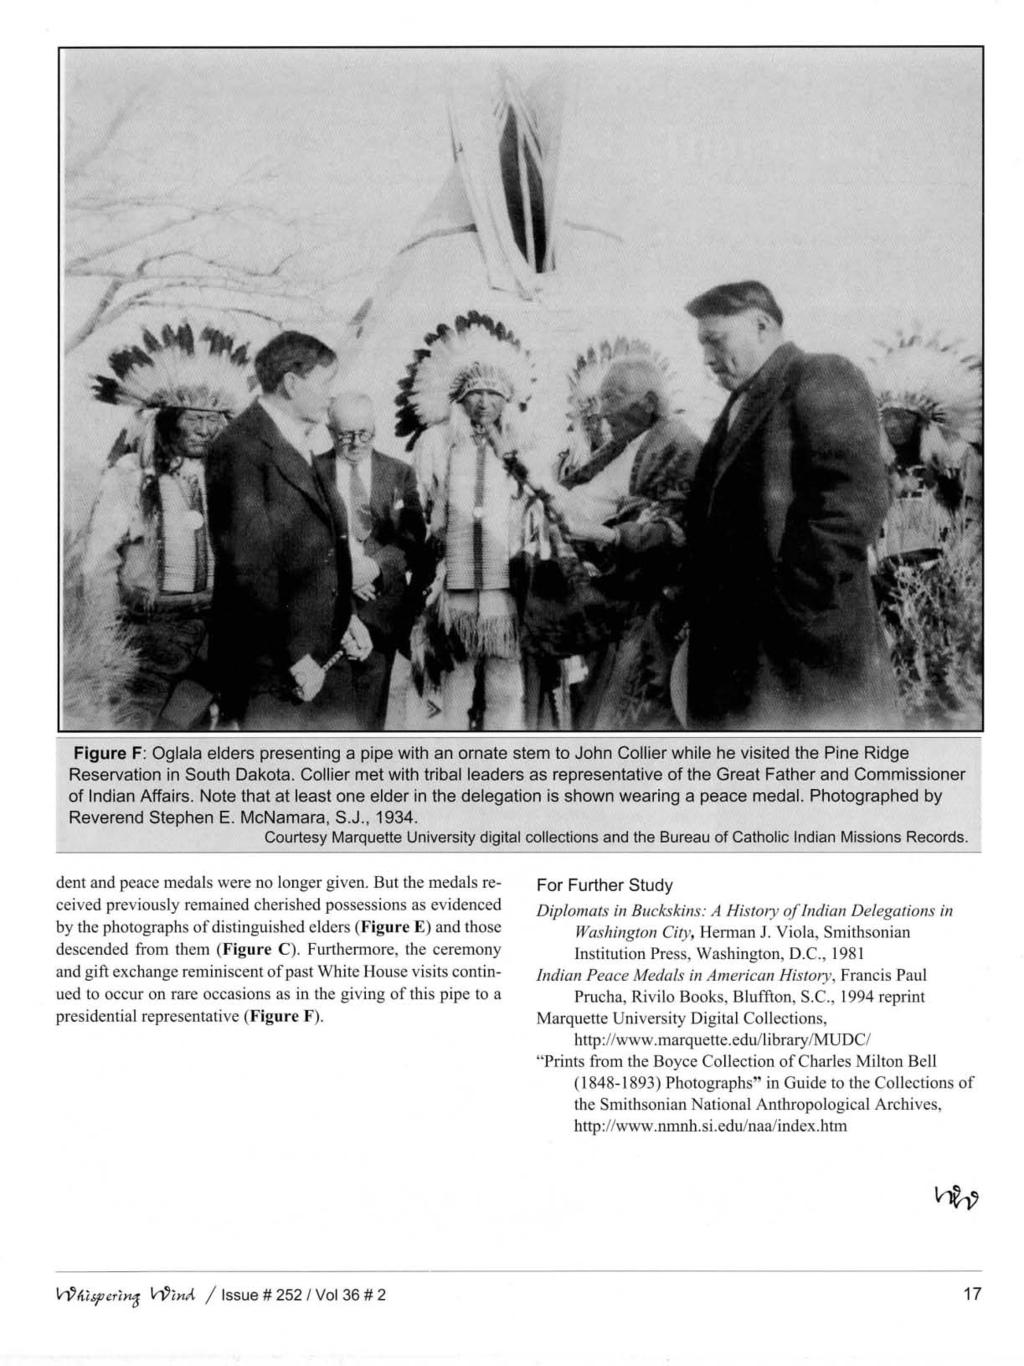 Figure F: Oglala elders presenting a pipe with an ornate stem to John Collier while he visited the Pine Ridge Reservation in South Dakota.